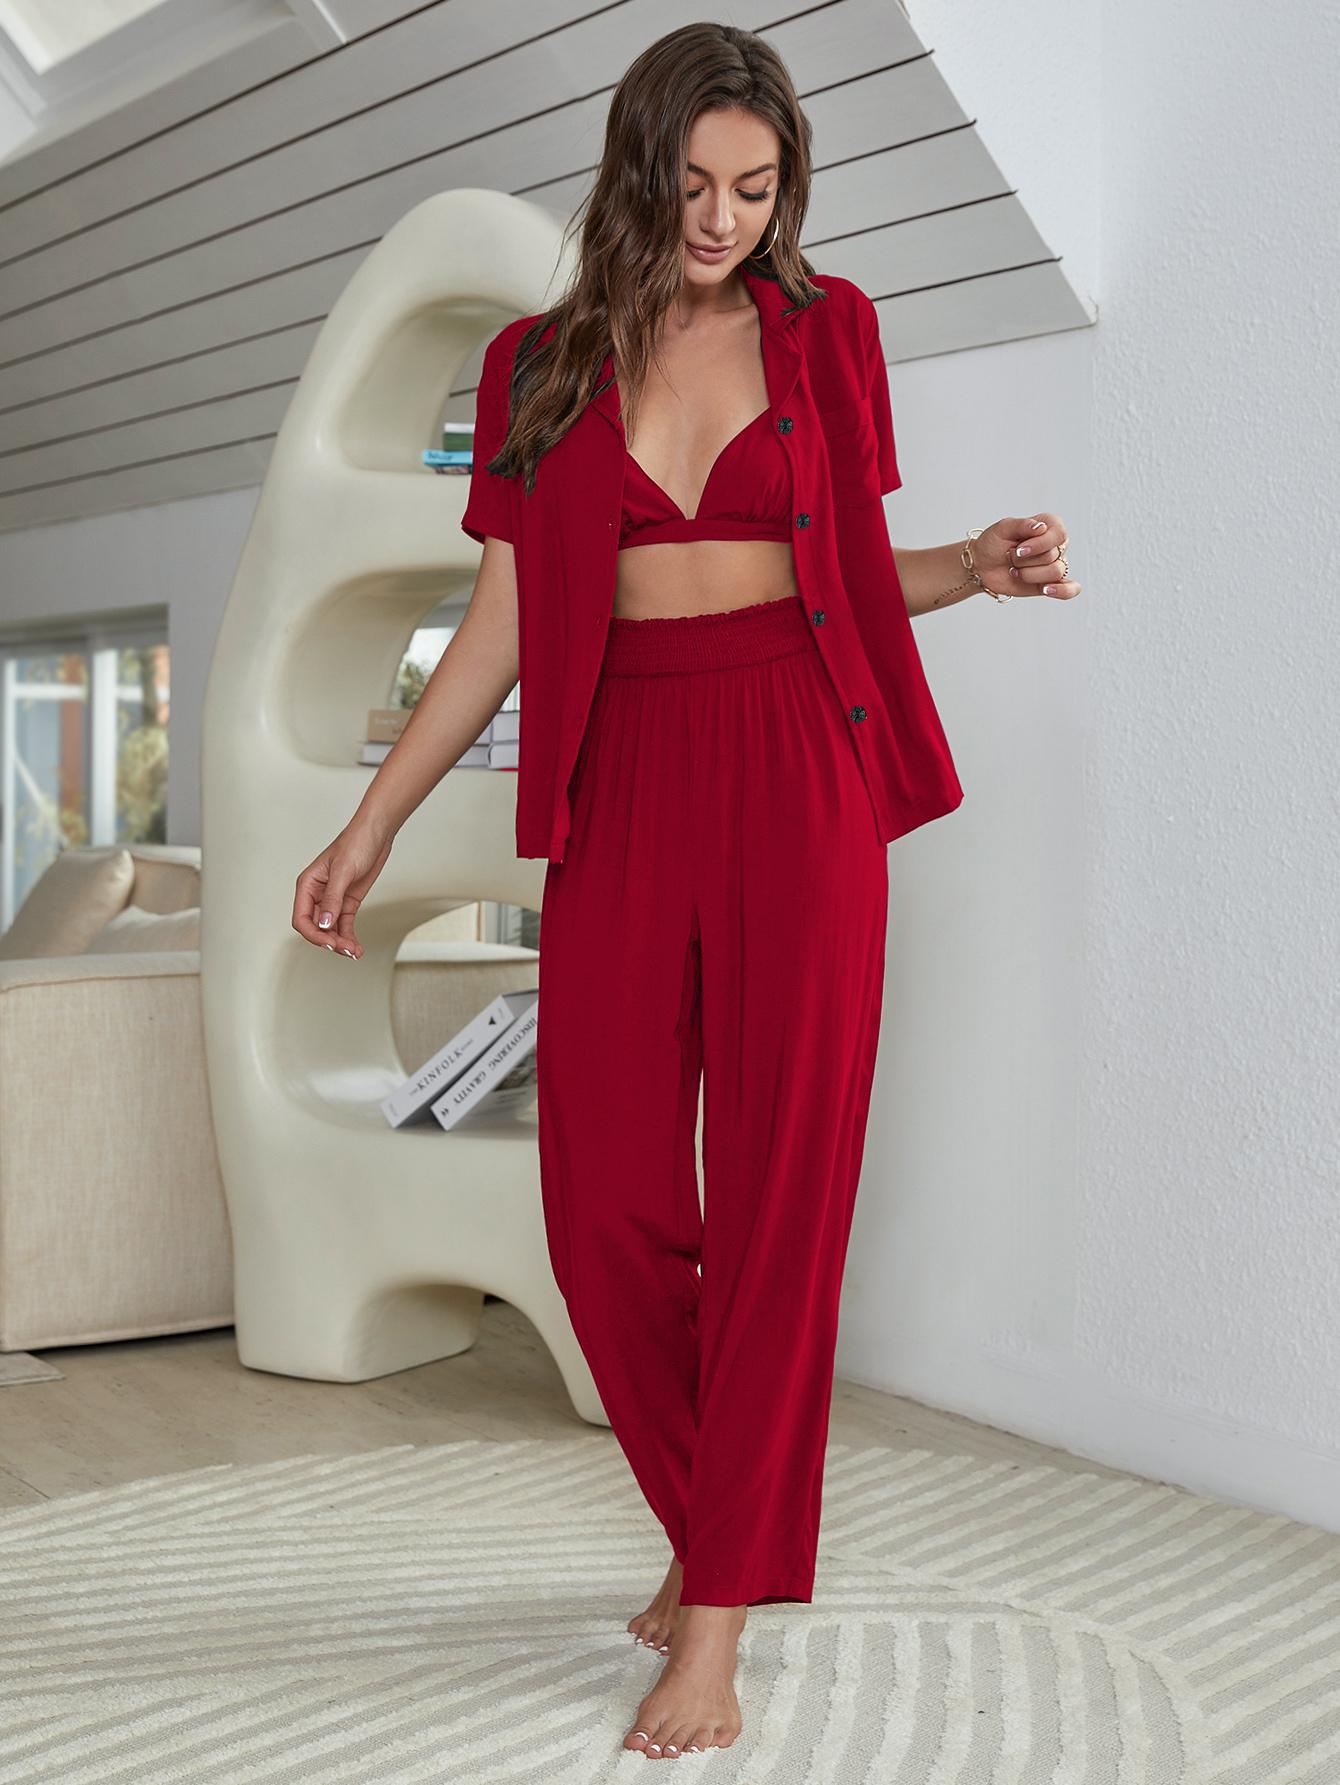 Short Sleeve Shirt, Bralette, and Pants Lounge Set - Red / S Wynter 4 All Seasons